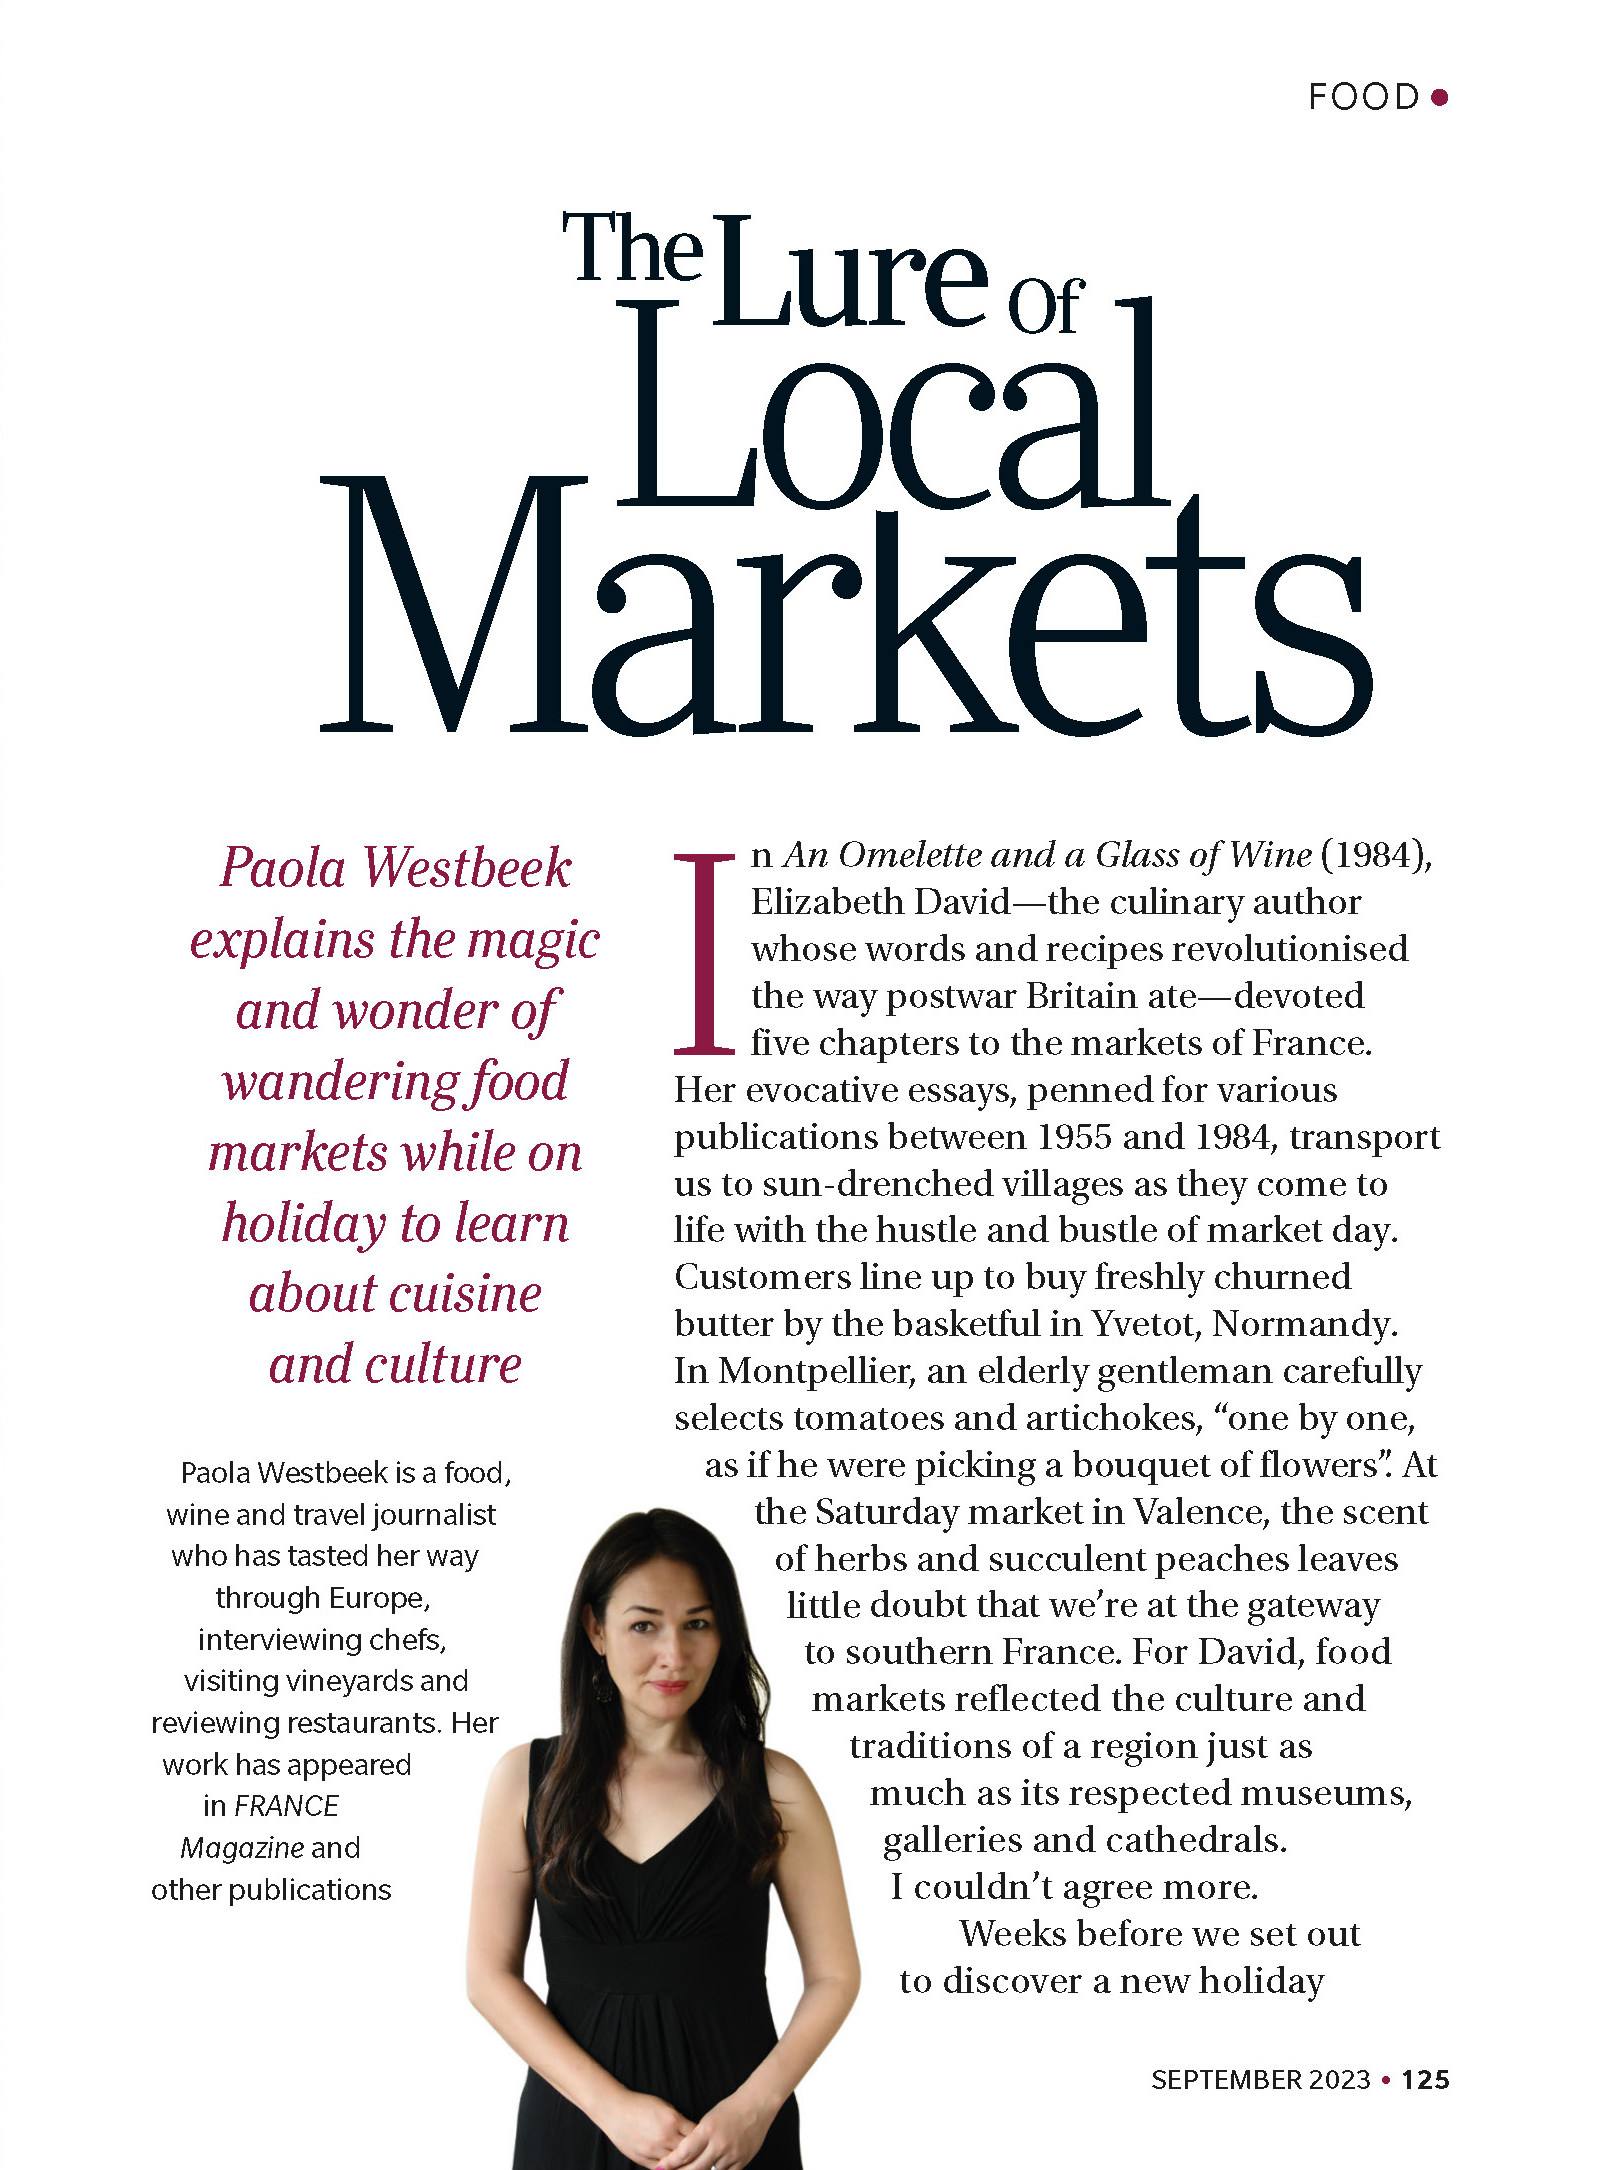 The lure of local markets, in Reader's Digest